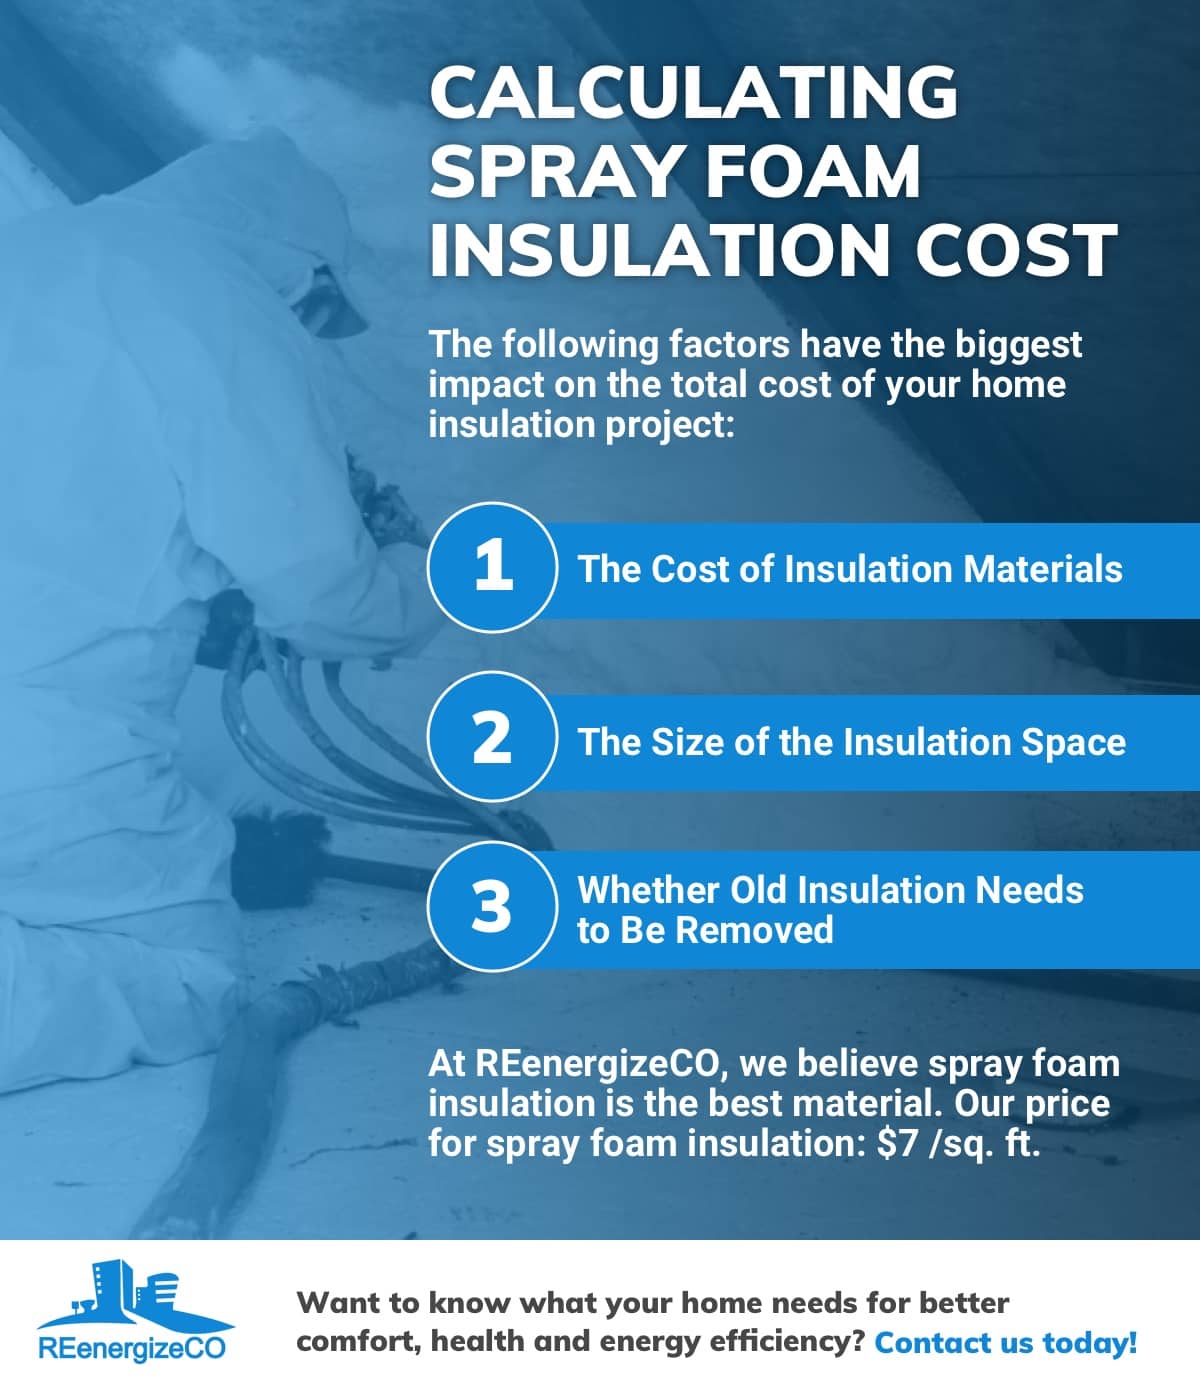 How Much Does Spray Foam Insulation Cost? | REenergizeCO